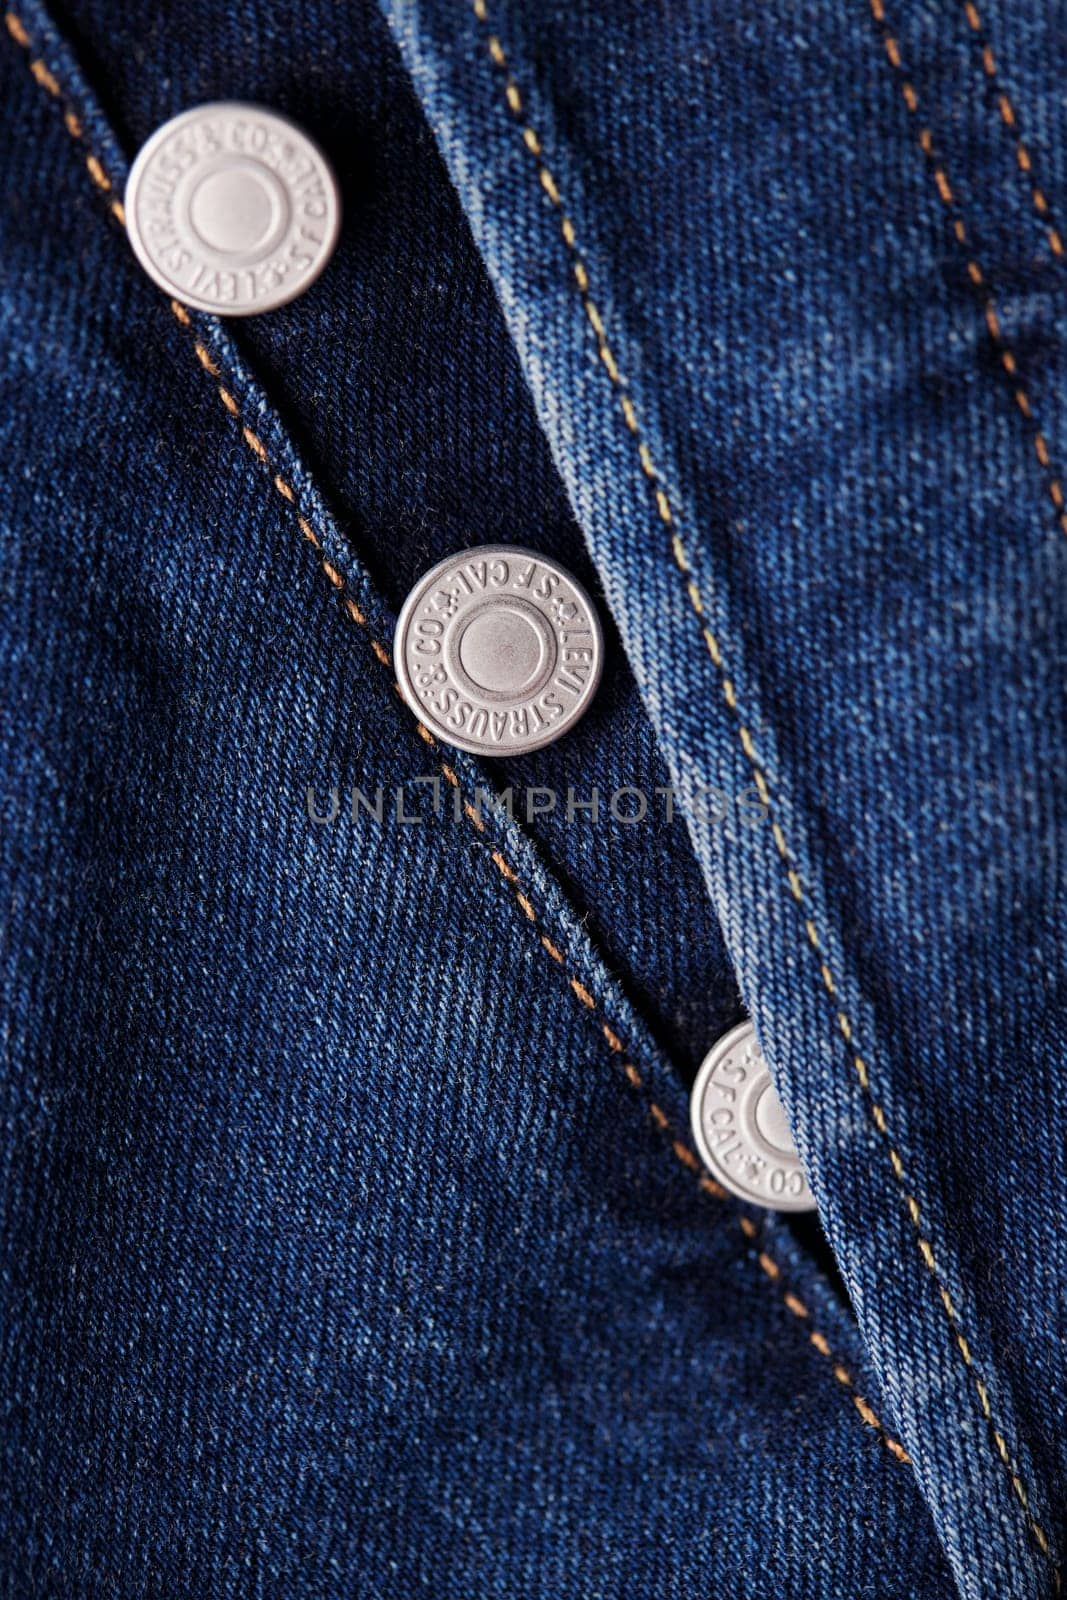 Close up of the details of new LEVI'S 501 Jeans. Seams and button fly close-up. Classic jeans model. LEVI'S is a brand name of Levi Strauss and Co, founded in 1853. 31.12.2021, Rostov, Russia.